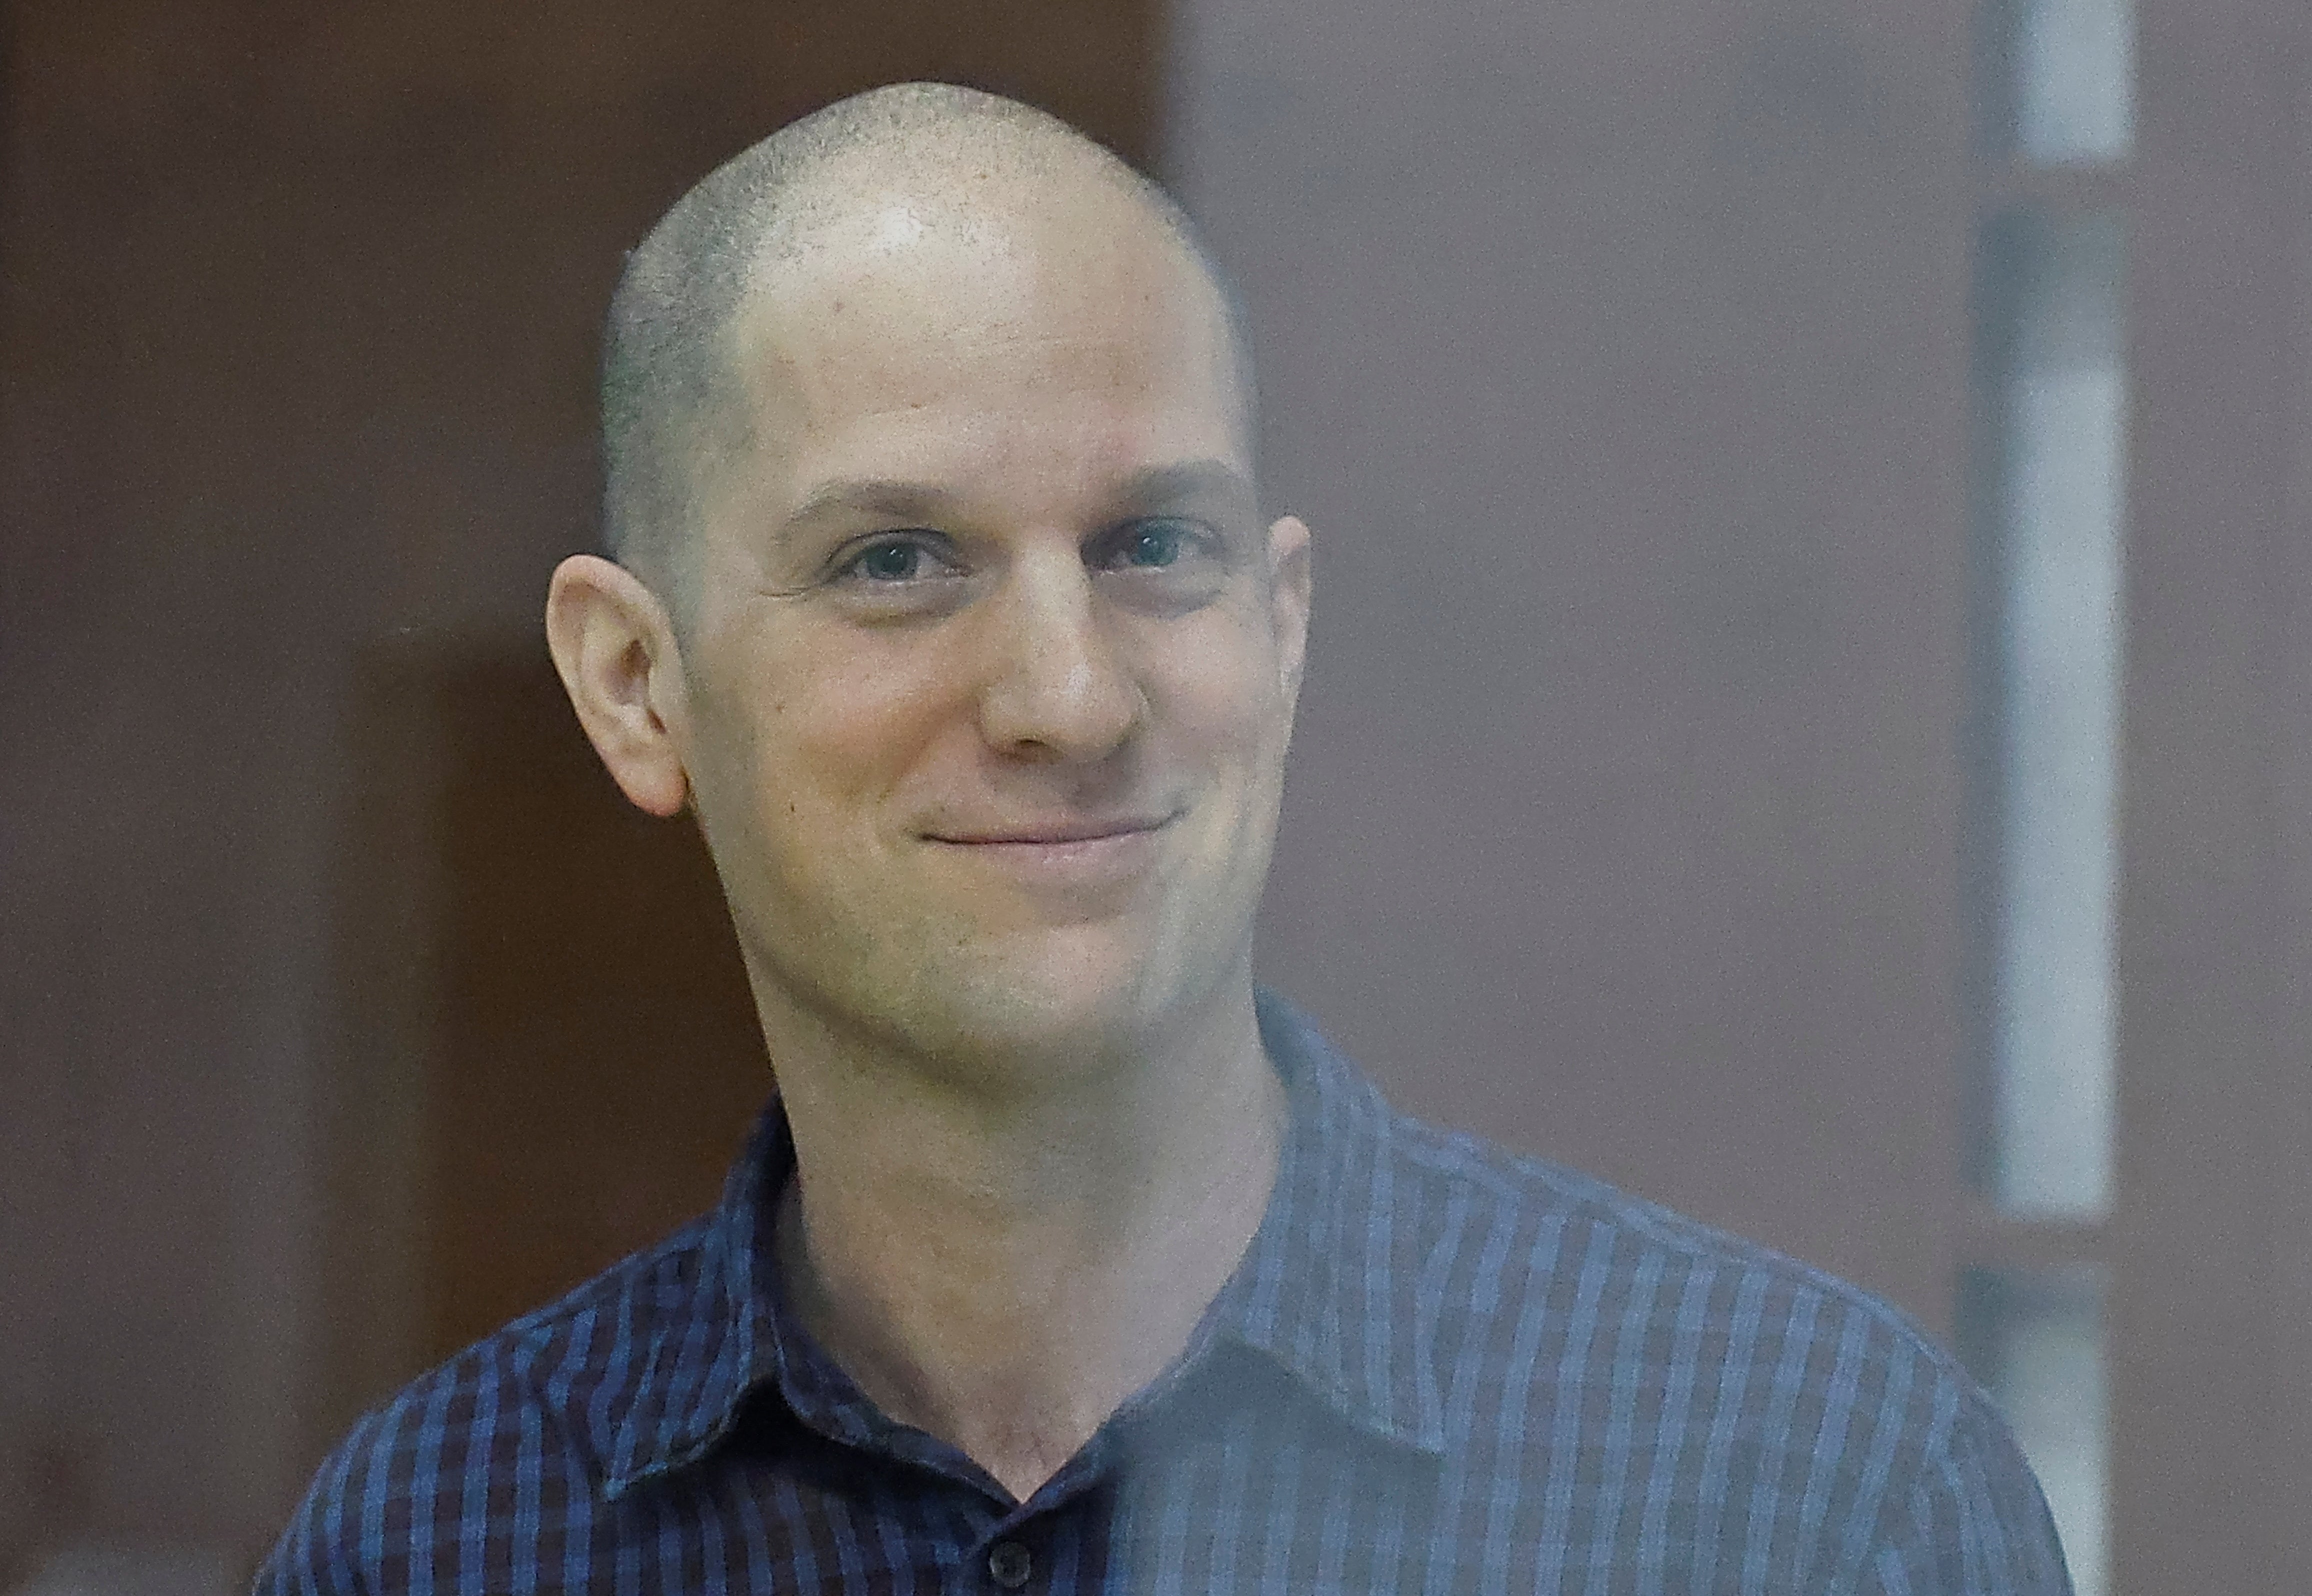 Wall Street Journal reporter Evan Gershkovich, who stands trial on spying charges, smiles inside an enclosure for defendants before a court hearing